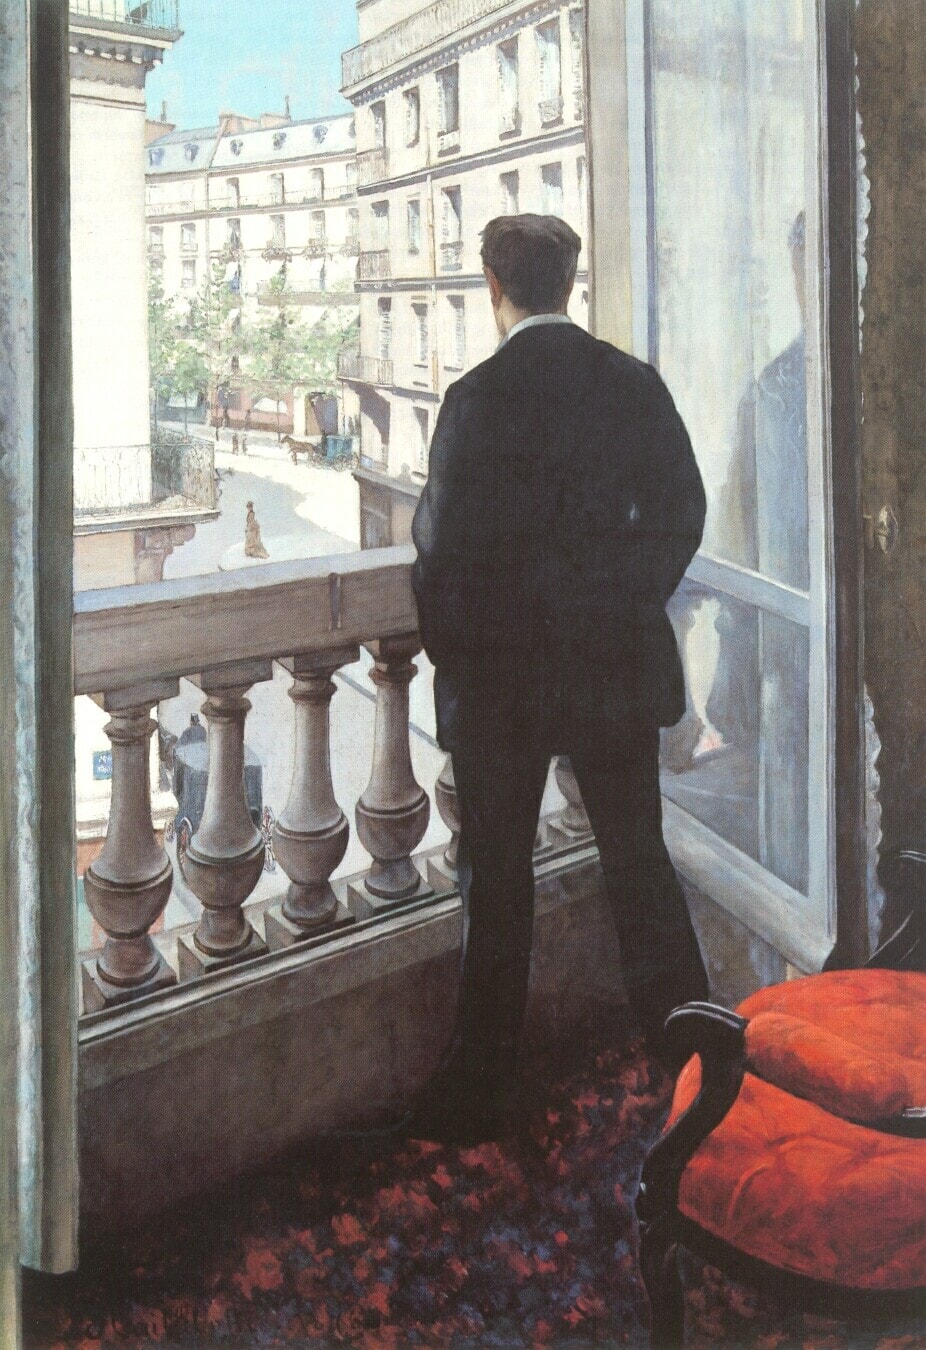 Gustave Caillebotte (1848 - 1894). A young man at his window. 1875